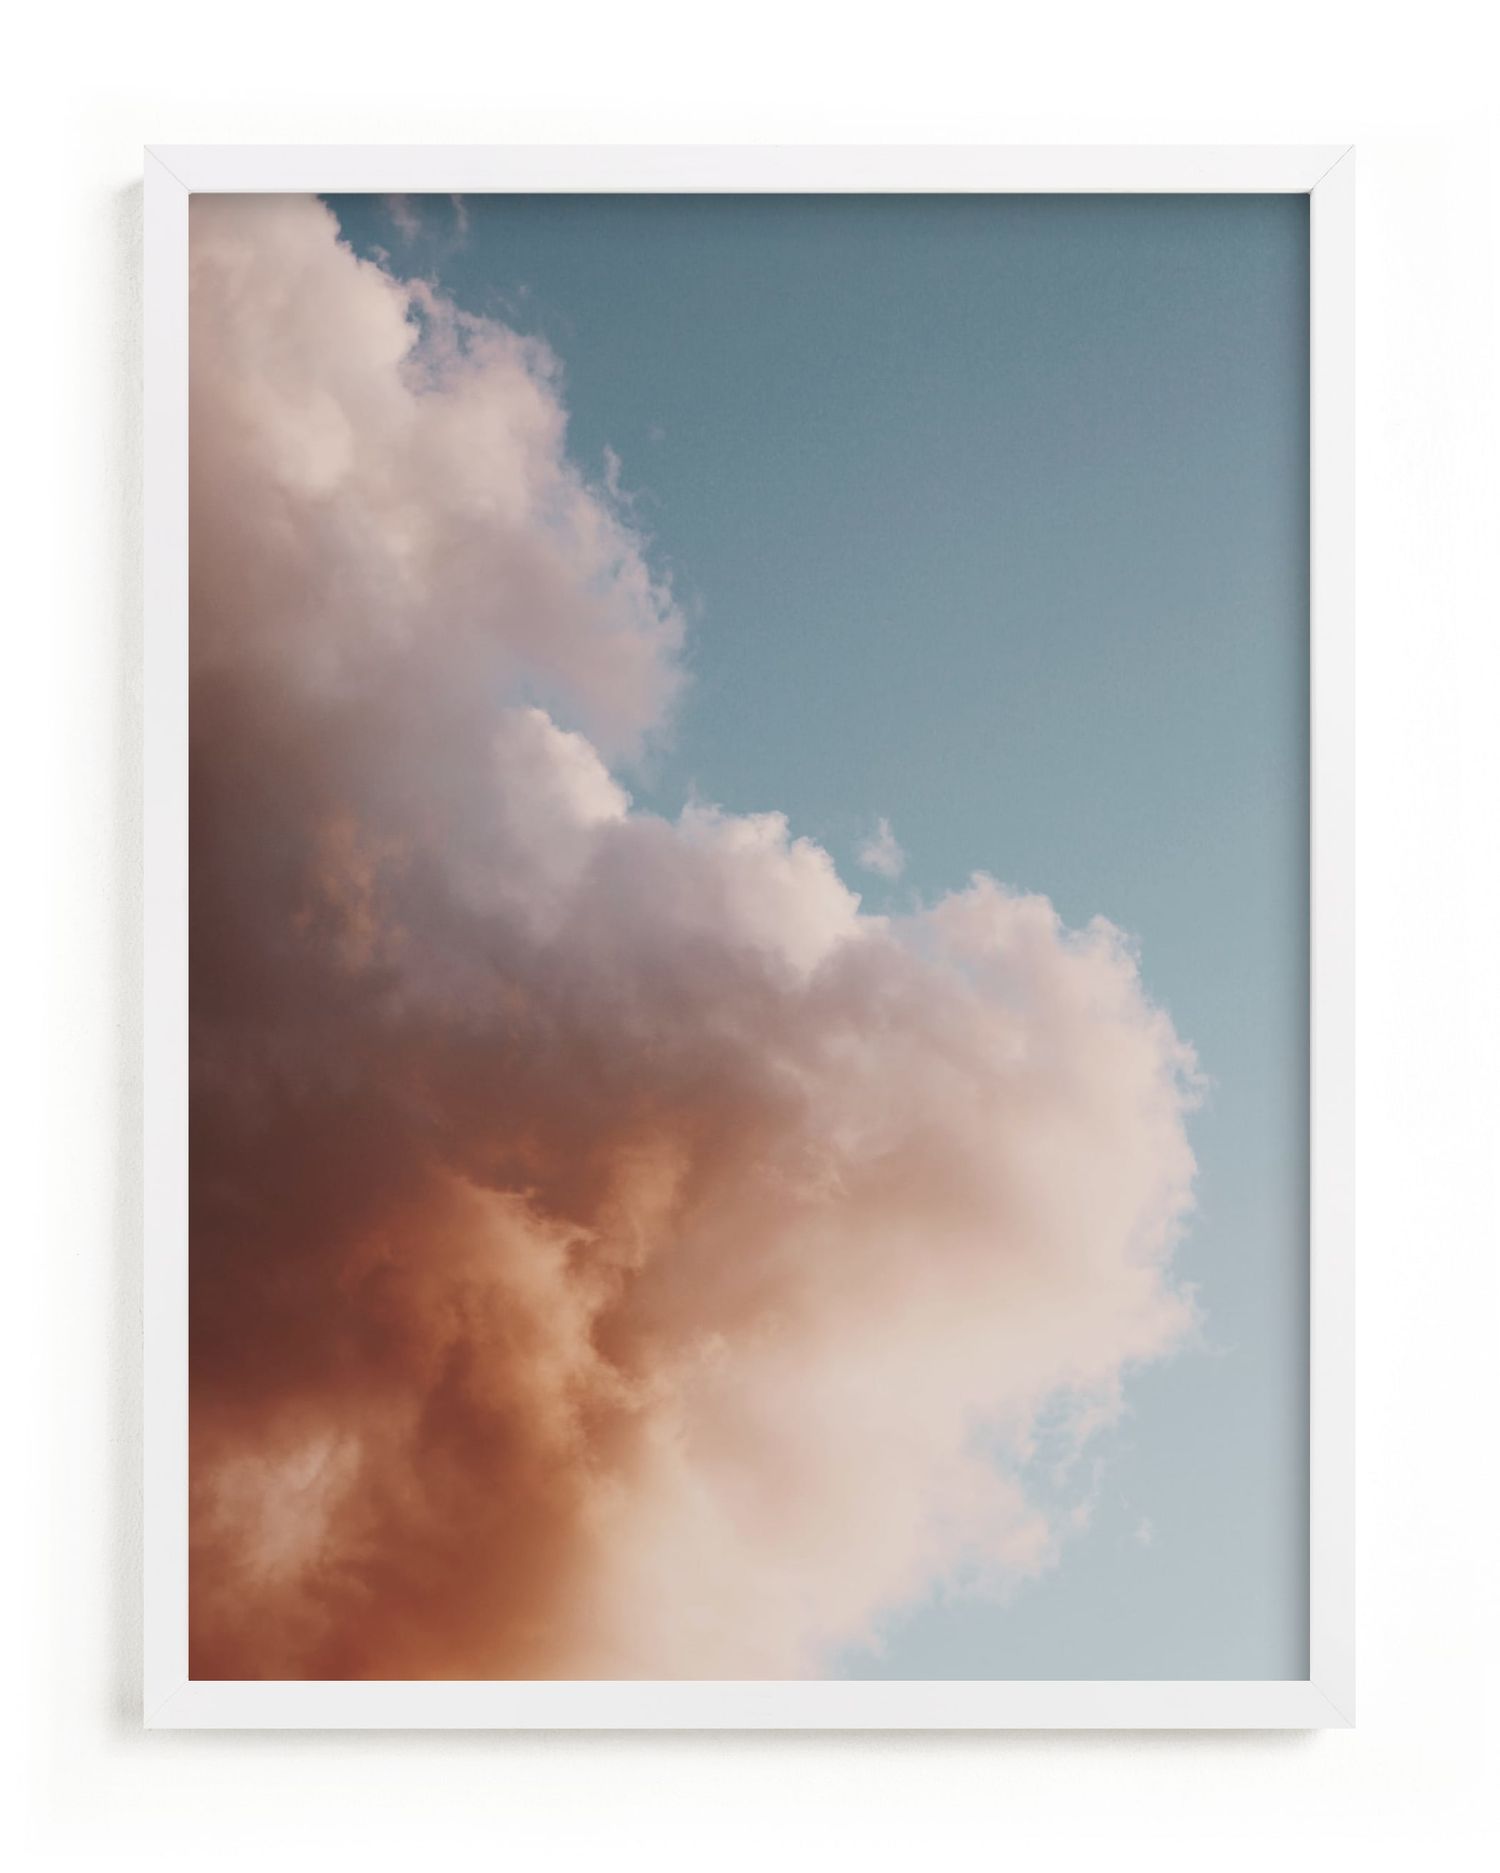 Shop Colors of the Sky (18x24), Matte Black Frame from Minted on Openhaus